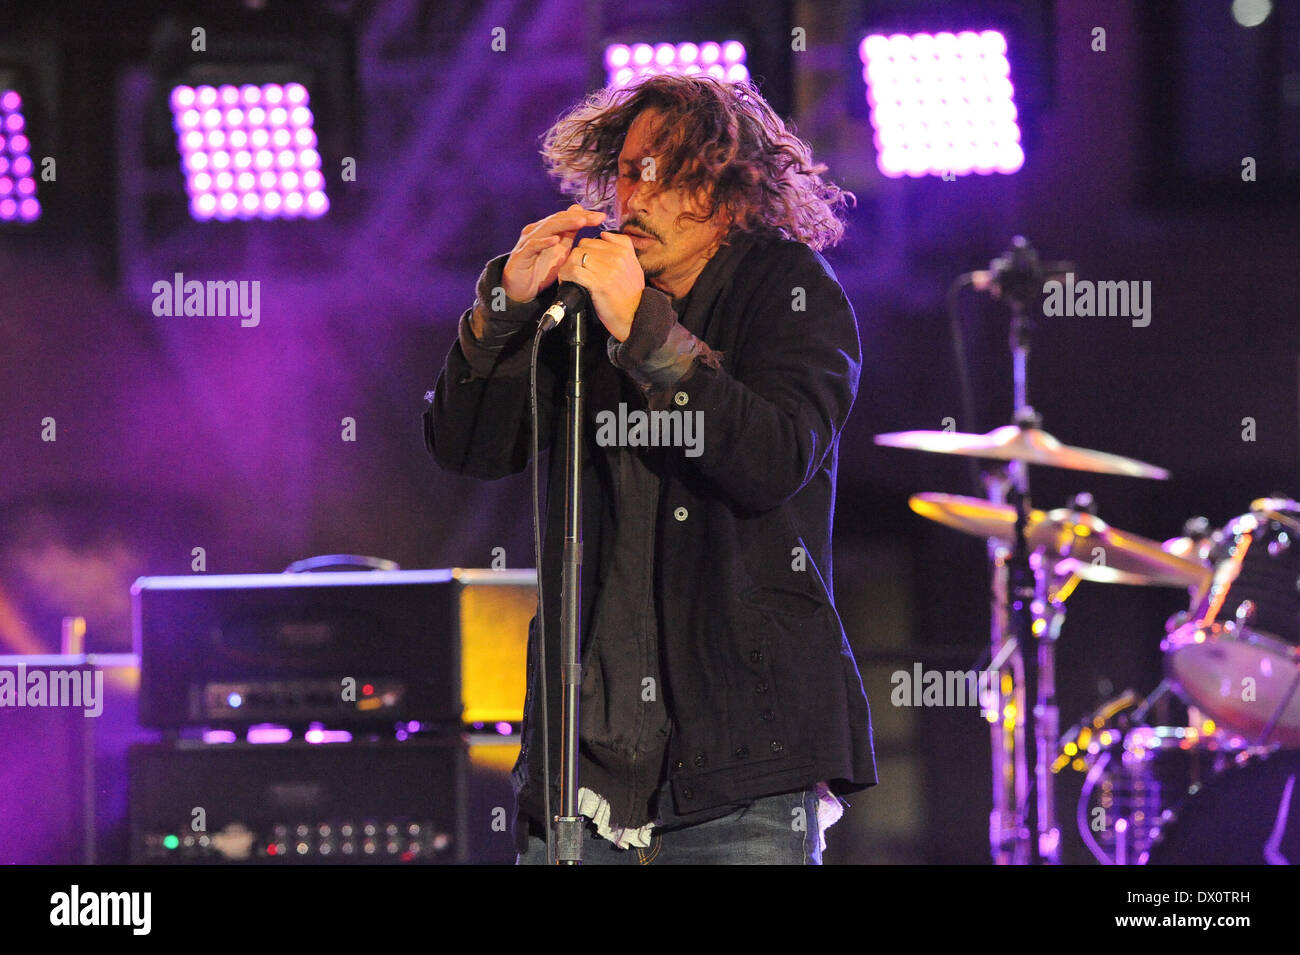 Austin, Texas, USA. 14th Mar, 2014. Chris Cornell of Soundgarden performs in concert at the Guitar Center Direct TV live stream show from a roof top party during South By Southwest (SXSW) on March 14, 2014 in Austin, Texas - USA (Photo by Manuel Nauta/NurPhoto) © Manuel Nauta/NurPhoto/ZUMAPRESS.com/Alamy Live News Stock Photo